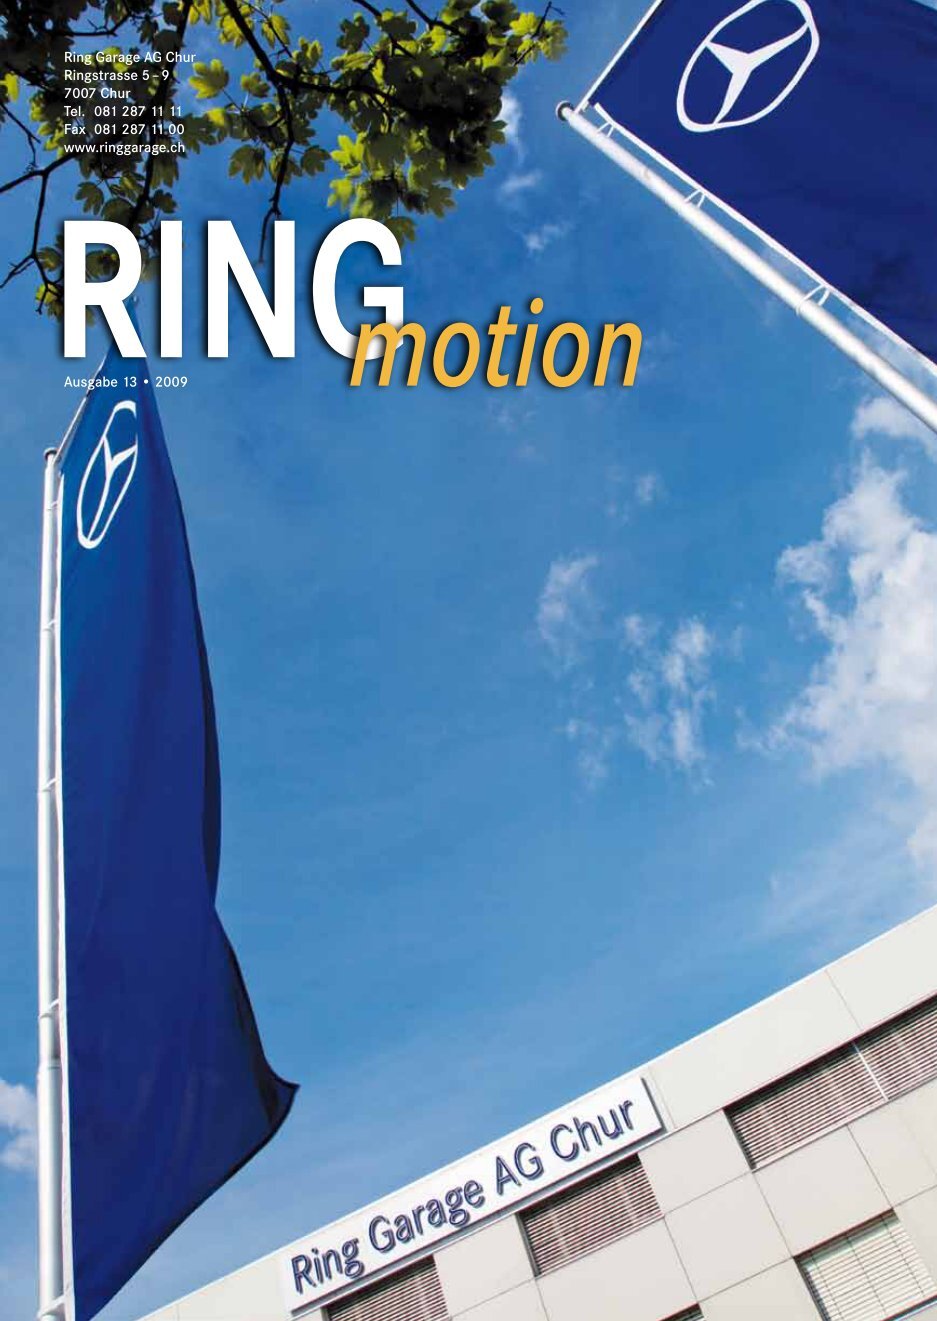 4 free Magazines from RINGGARAGE.MERCEDES.BENZ.CH